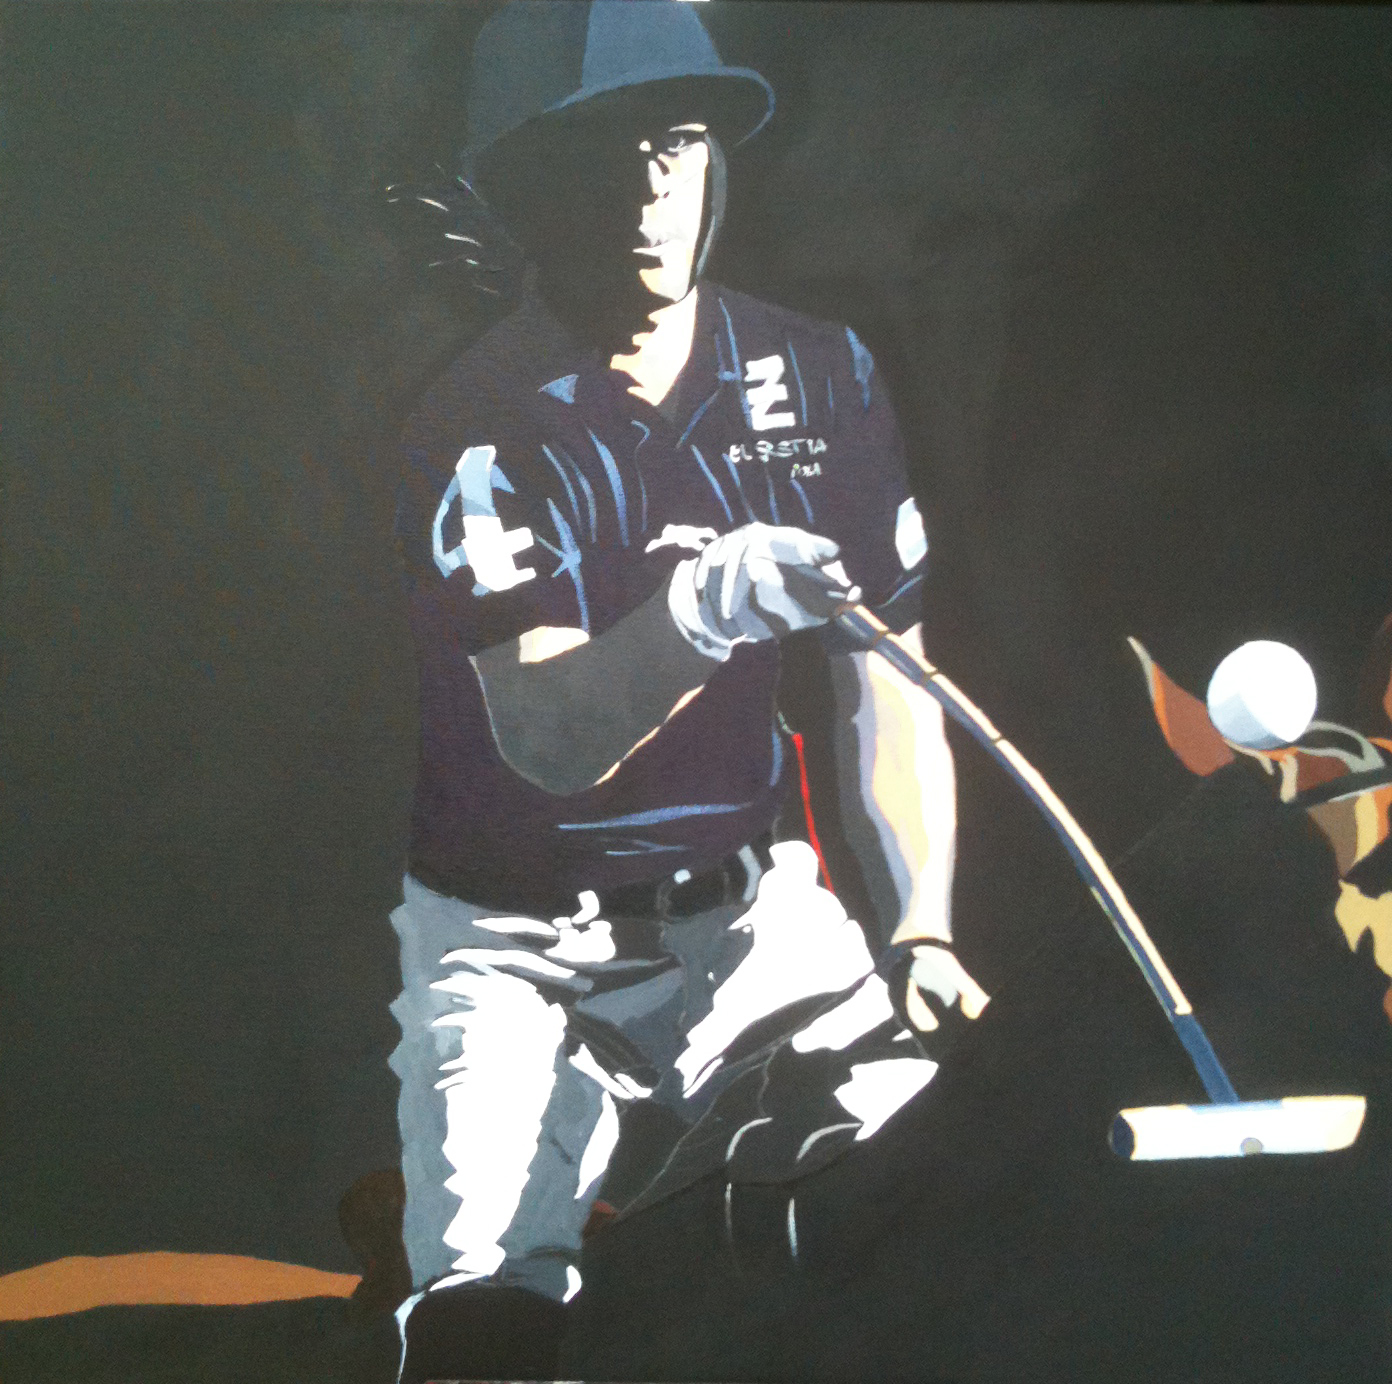   Polo Up Close and Personal (No. 3). &nbsp;Acrylic polymer on canvas.&nbsp;65 x 65cm.&nbsp; ©&nbsp; 2012 Ida Montague.&nbsp;Corporate Collection, Sydney.    